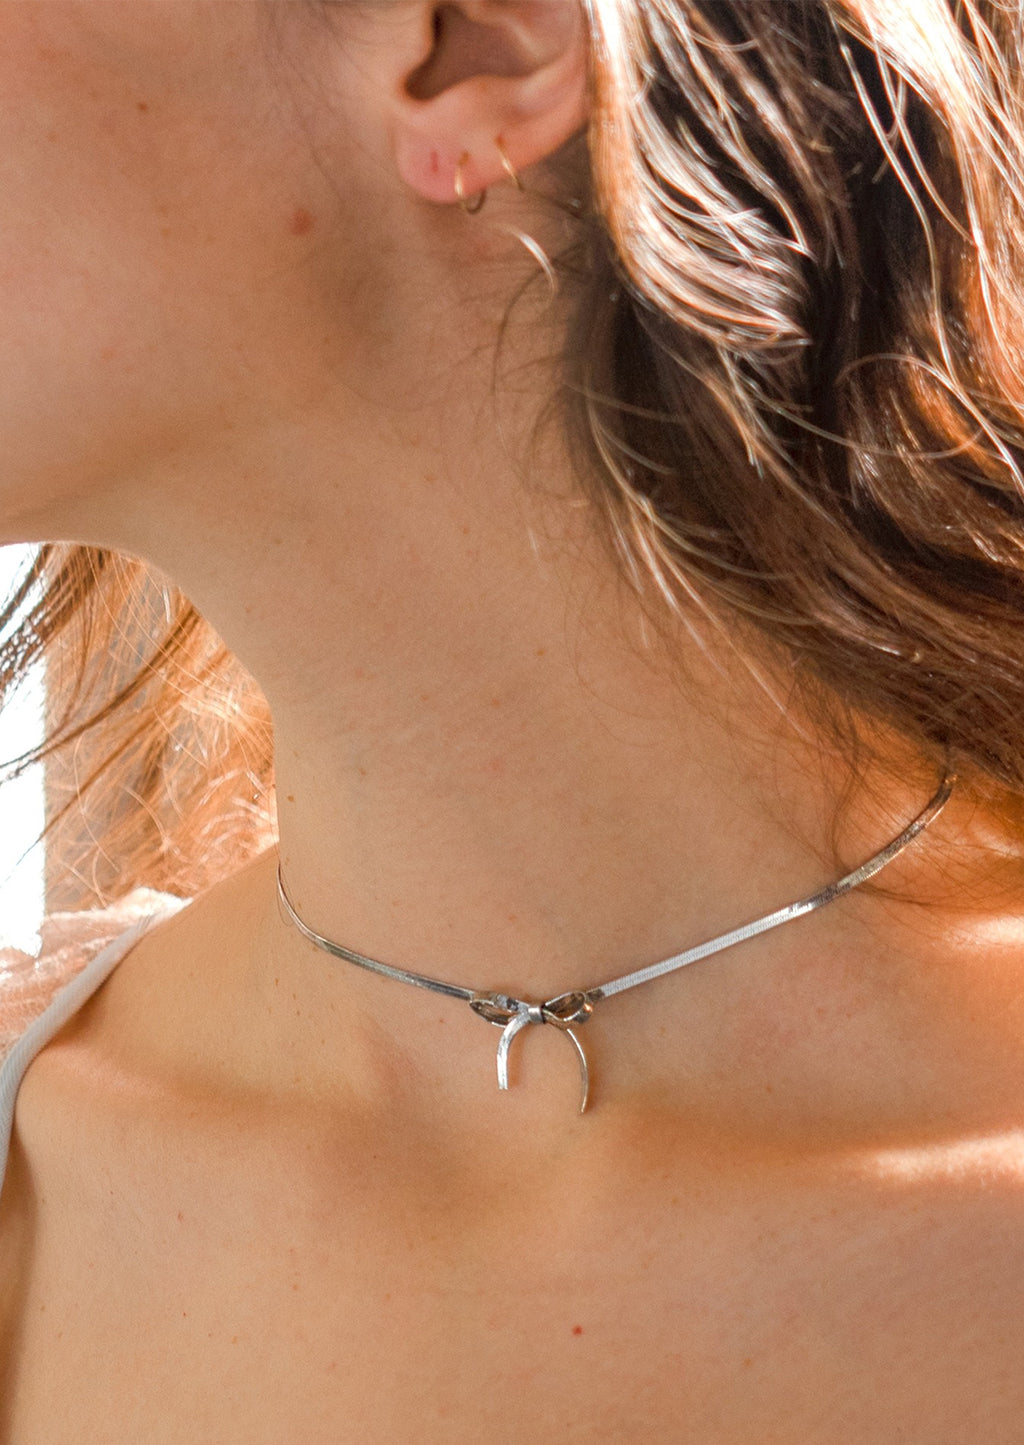 Silver: A woman wearing a silver choker-style necklace with bow shape at front.